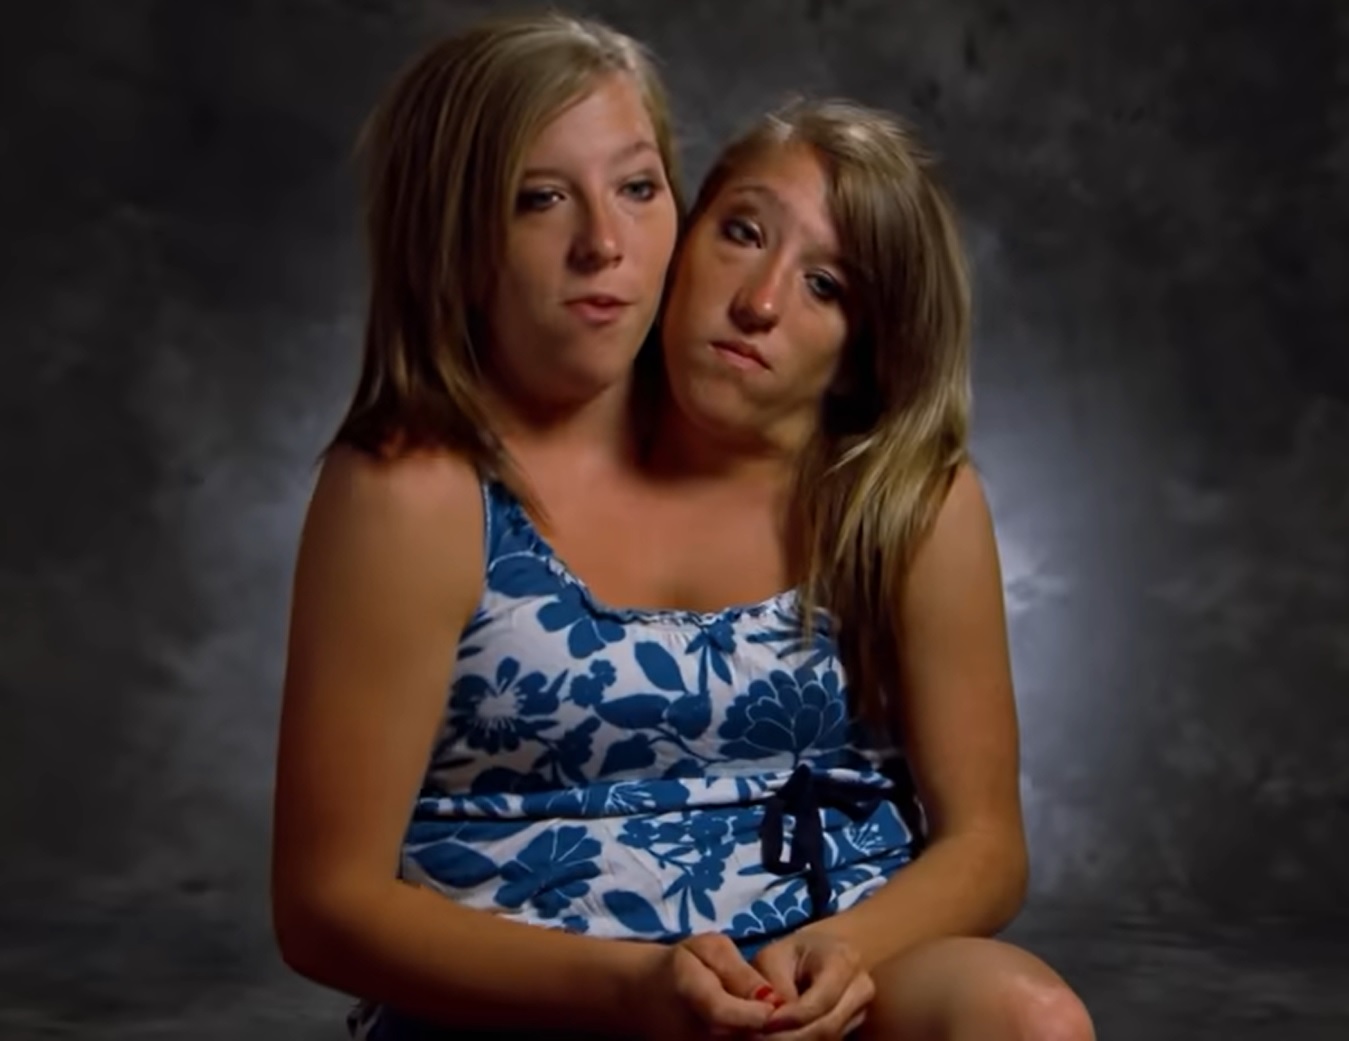 Abby Hensel, Brittany Hensel Reality Show: Conjoined Twins Star In TLC's ' Abby And Brittany' (VIDEO)